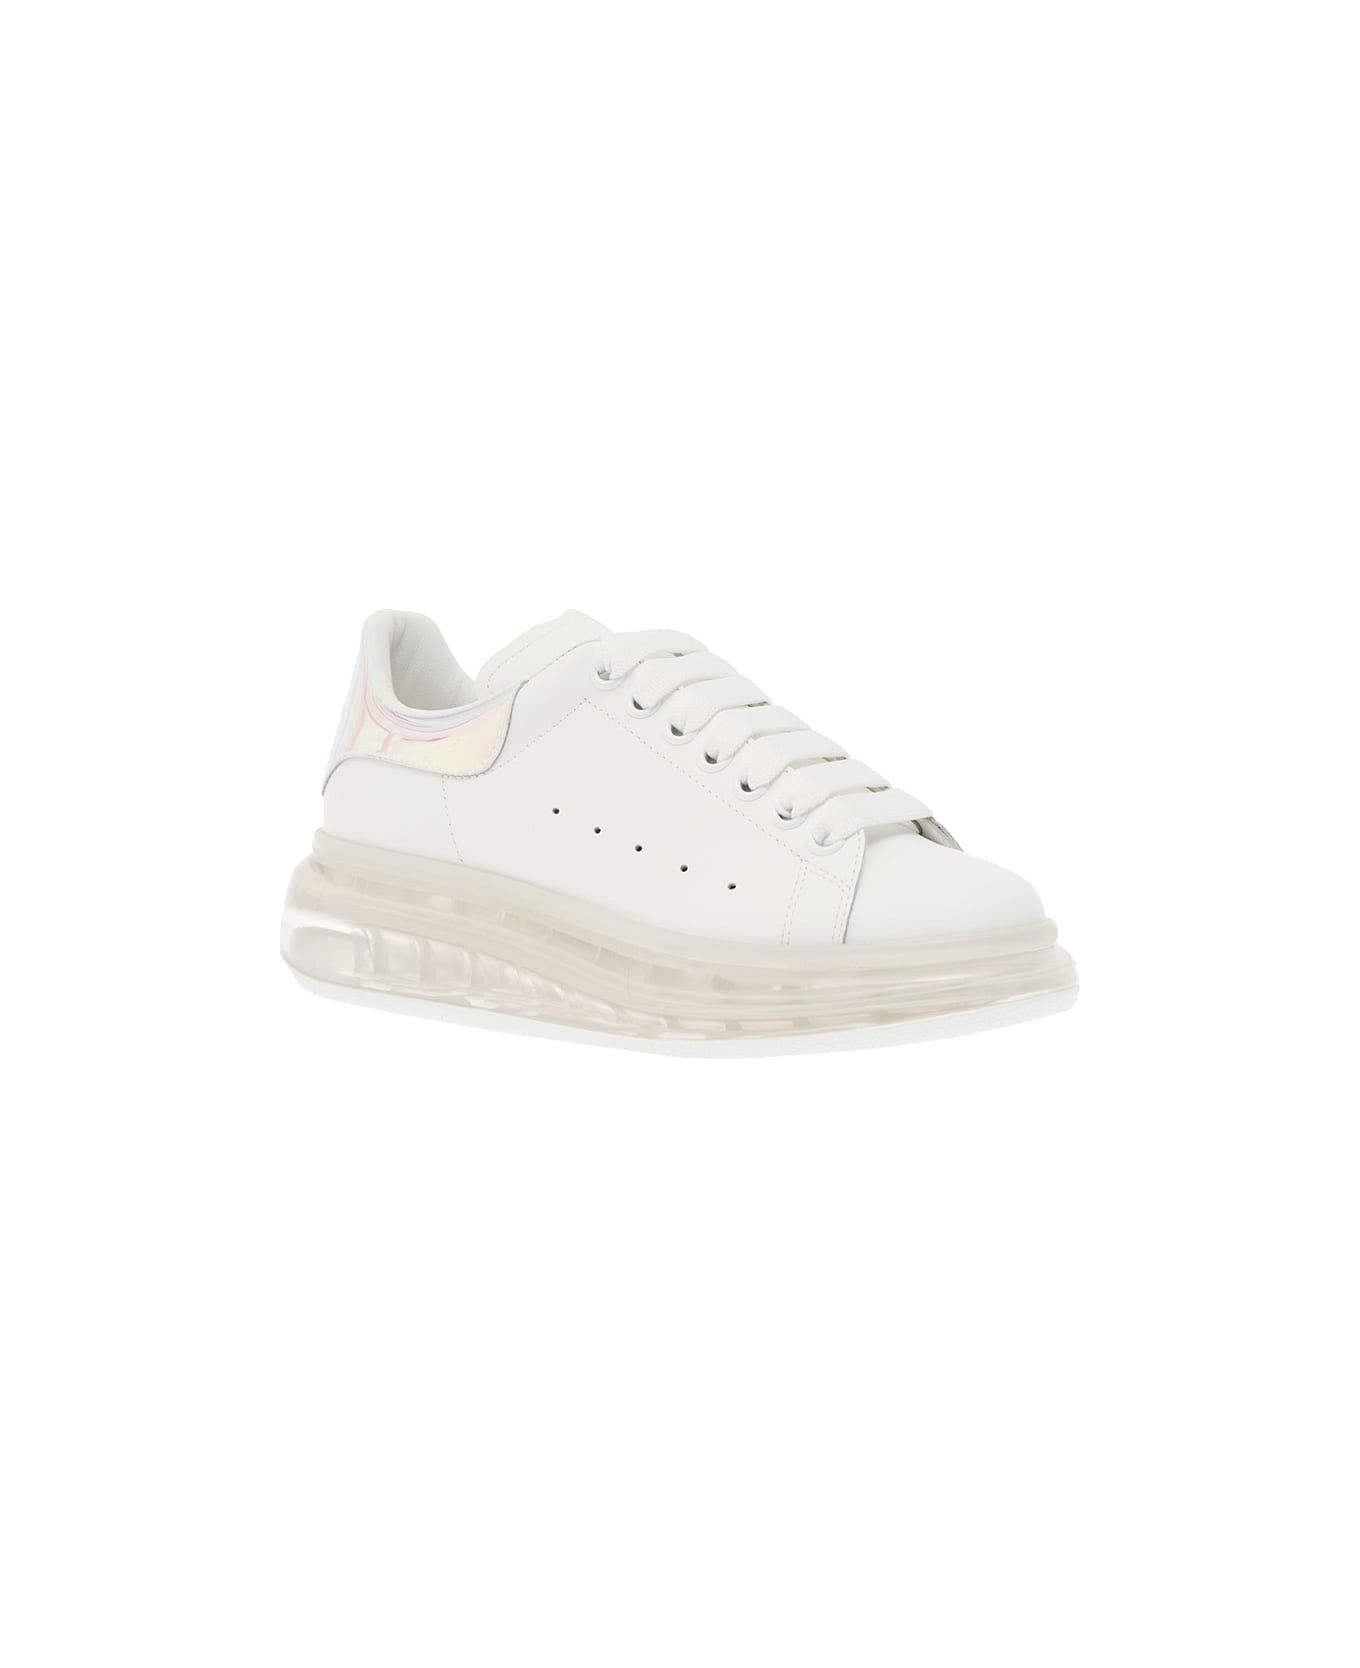 Alexander McQueen Woman's Oversize White Leather Sneakers With Multicolor Heel Tab - White